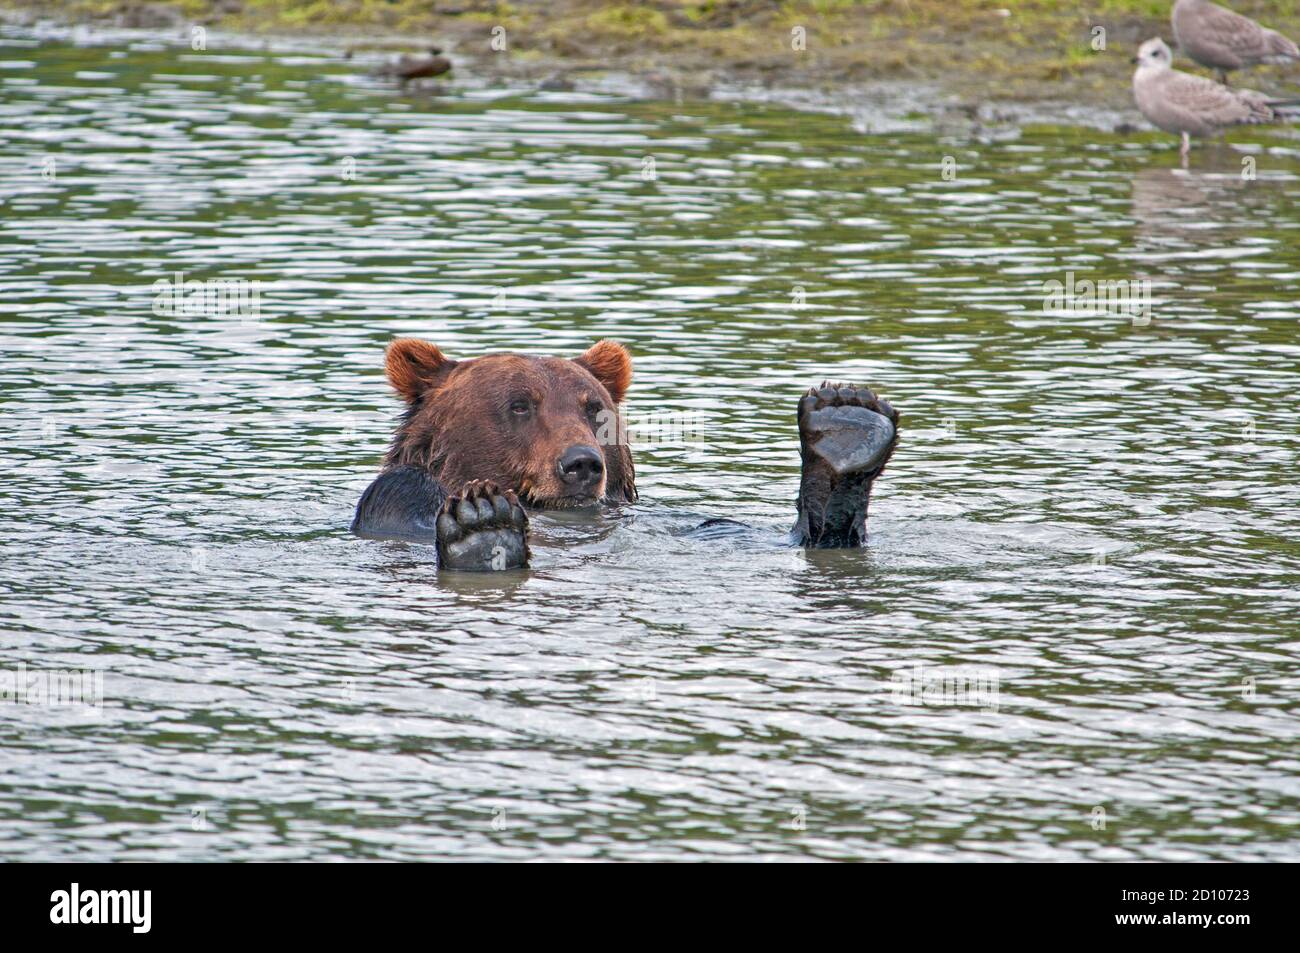 Grizzly bear in water Stock Photo